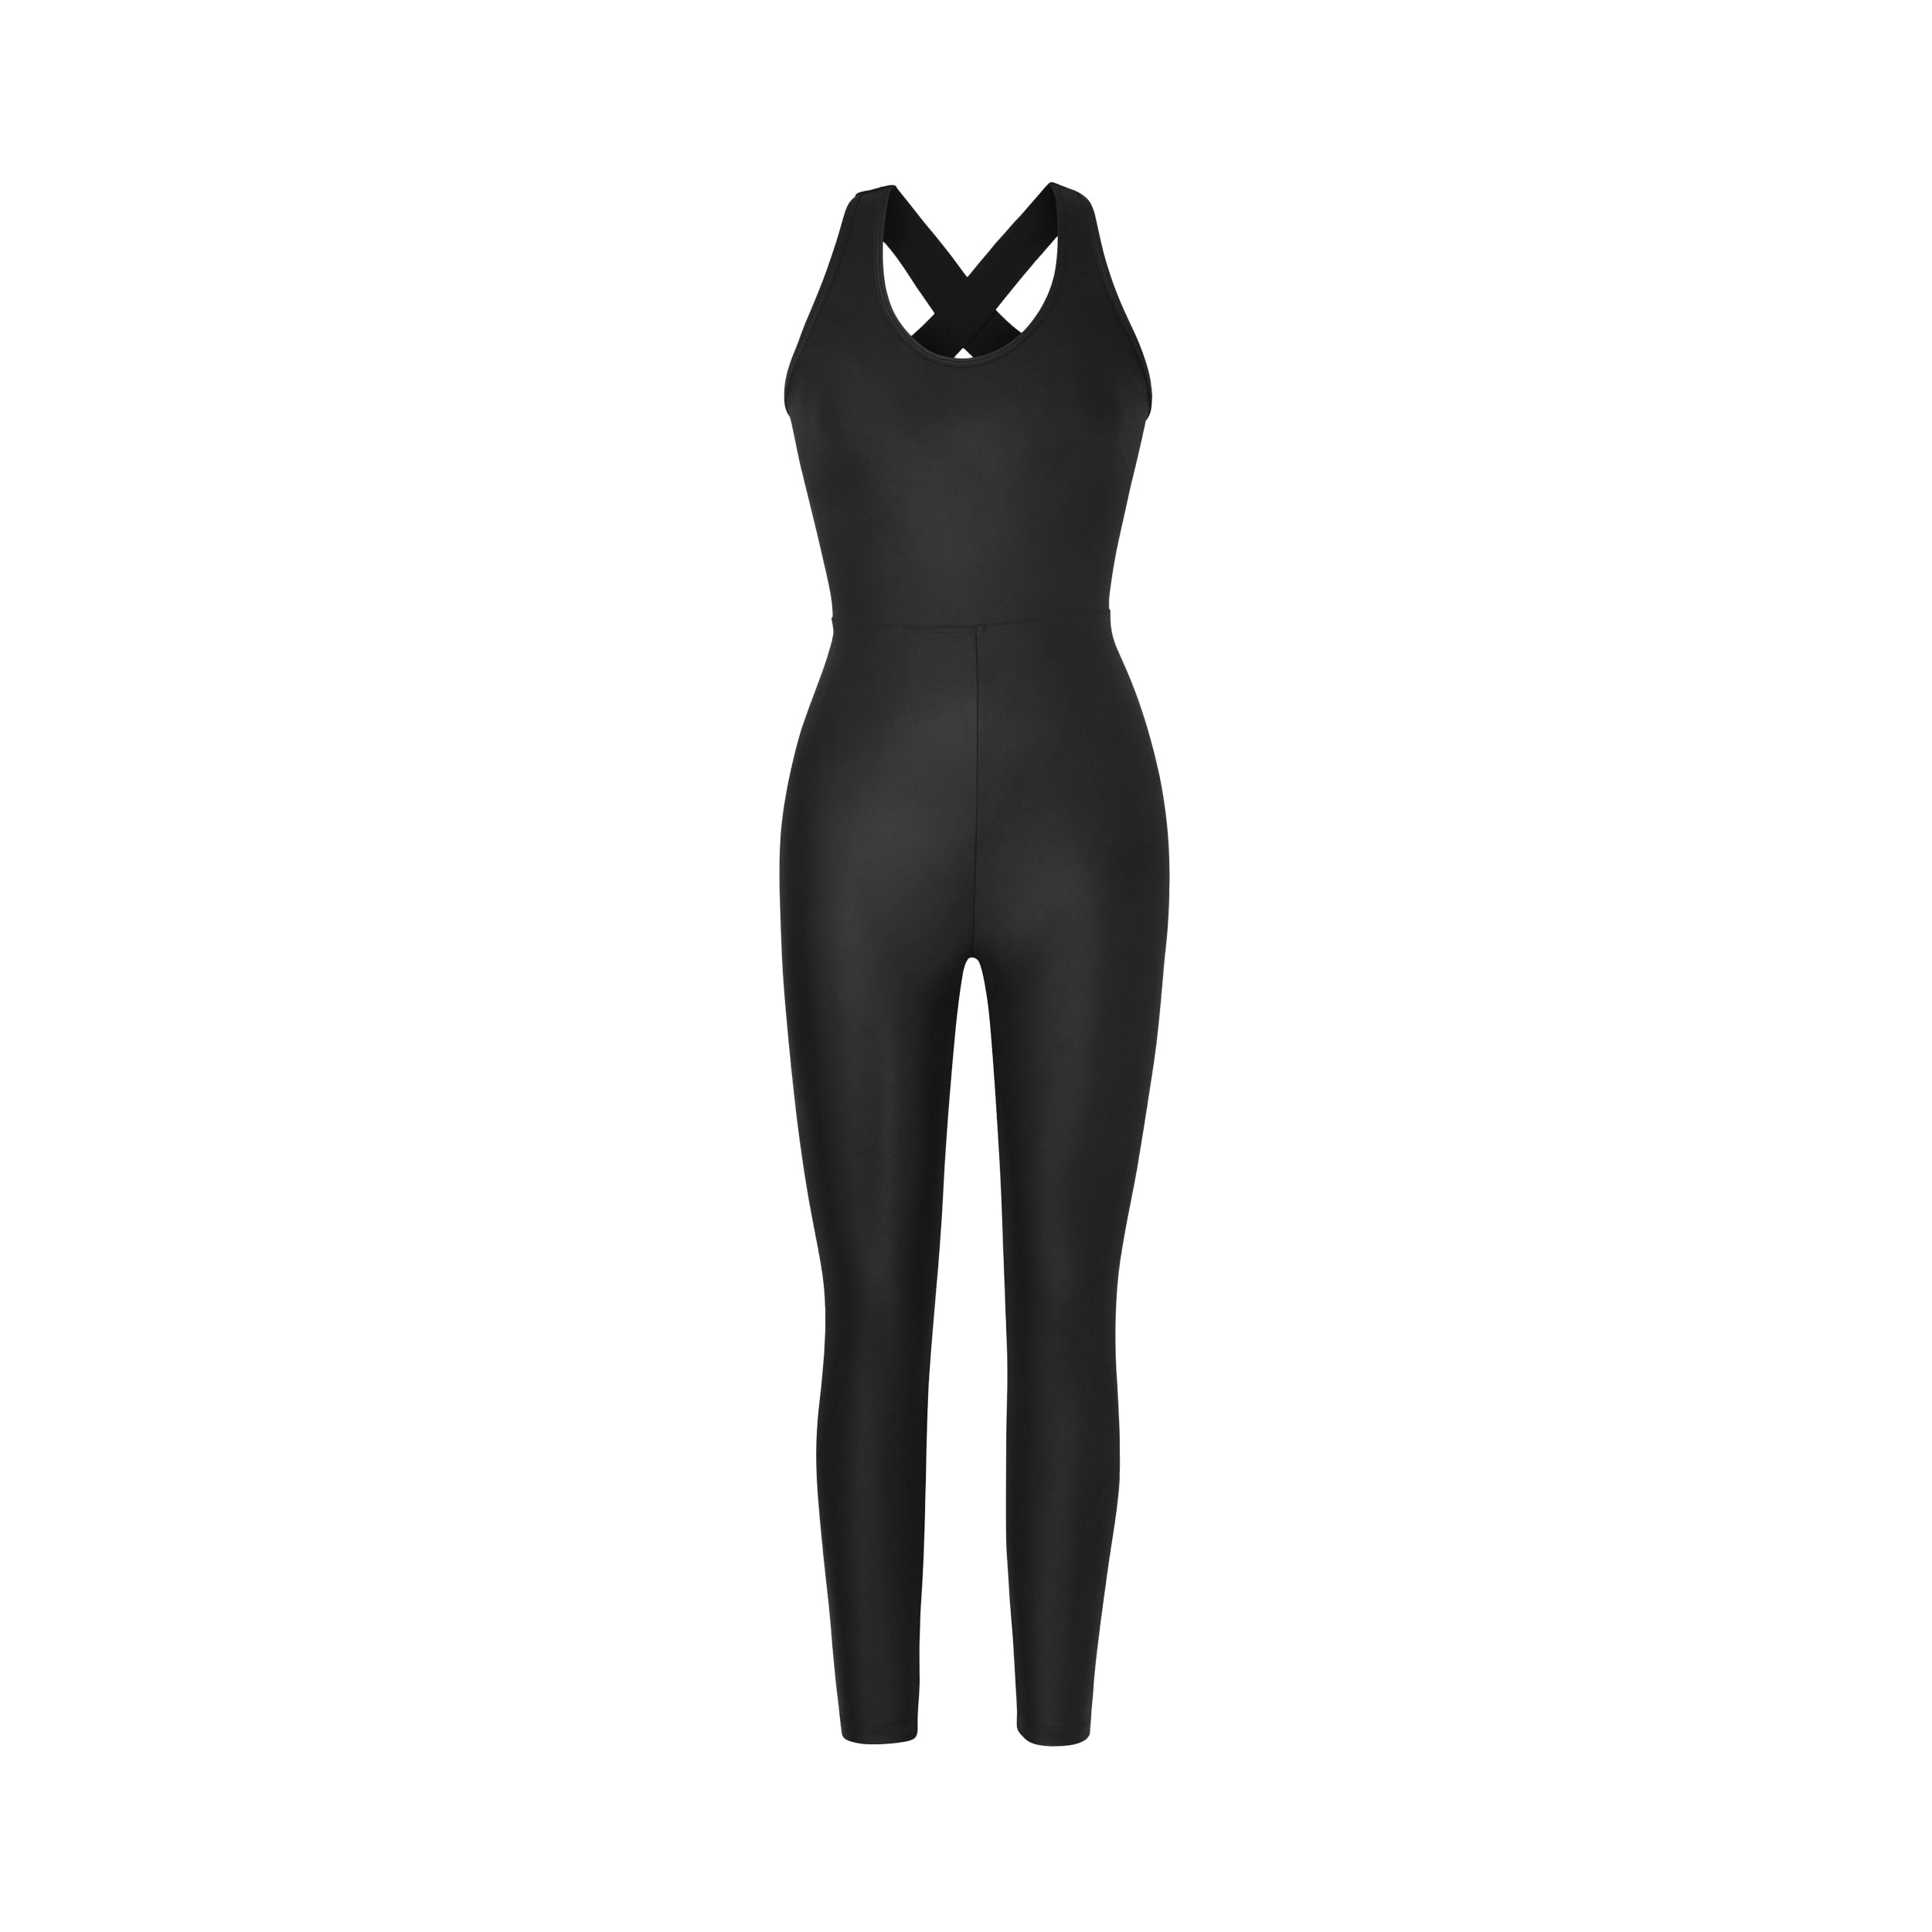 Product shot of black jumpsuit designed with a figure-flattering waistline and strappy back. Designed with our iconic Liquid shine fabric.